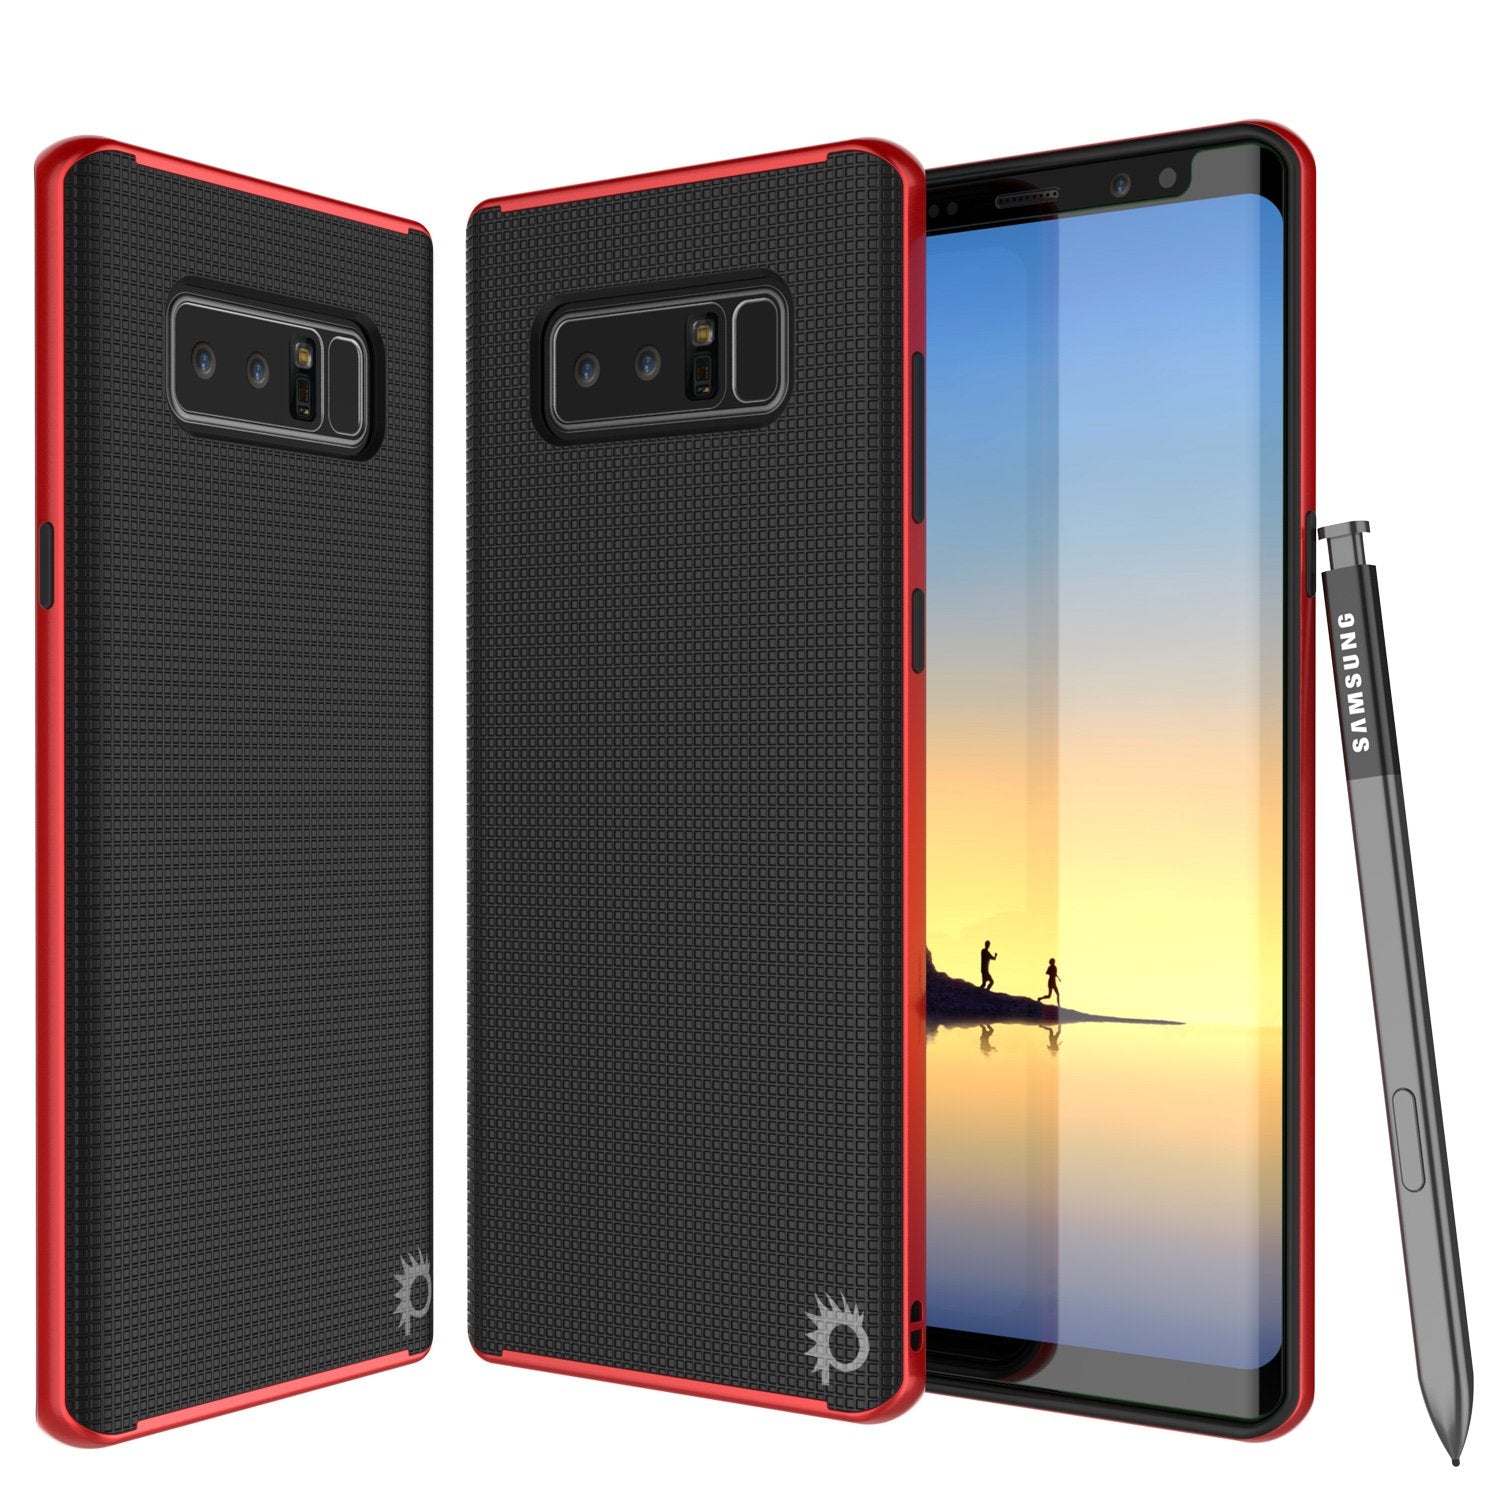 Galaxy Note 8 Case, PunkCase [Stealth Series] Hybrid 3-Piece Shockproof Dual Layer Cover [Non-Slip] [Soft TPU + PC Bumper] with PUNKSHIELD Screen Protector for Samsung Note 8 [Red]